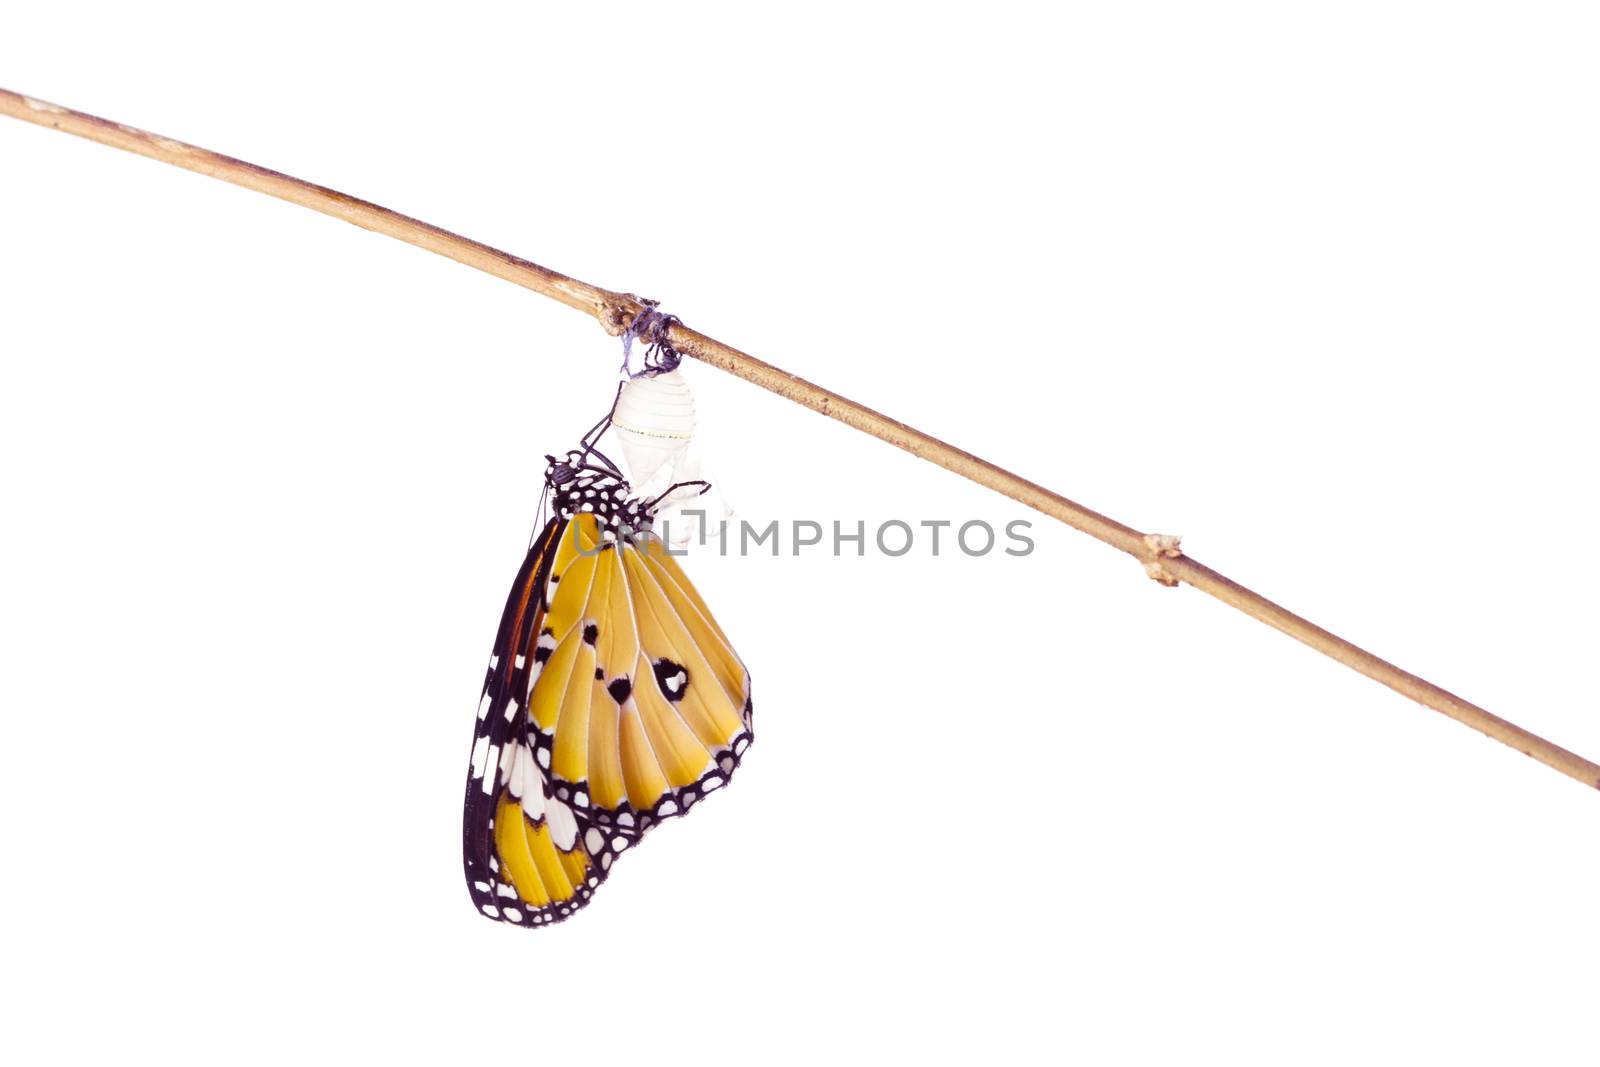 Monarch butterfly emerging from its chrysalis by wyoosumran